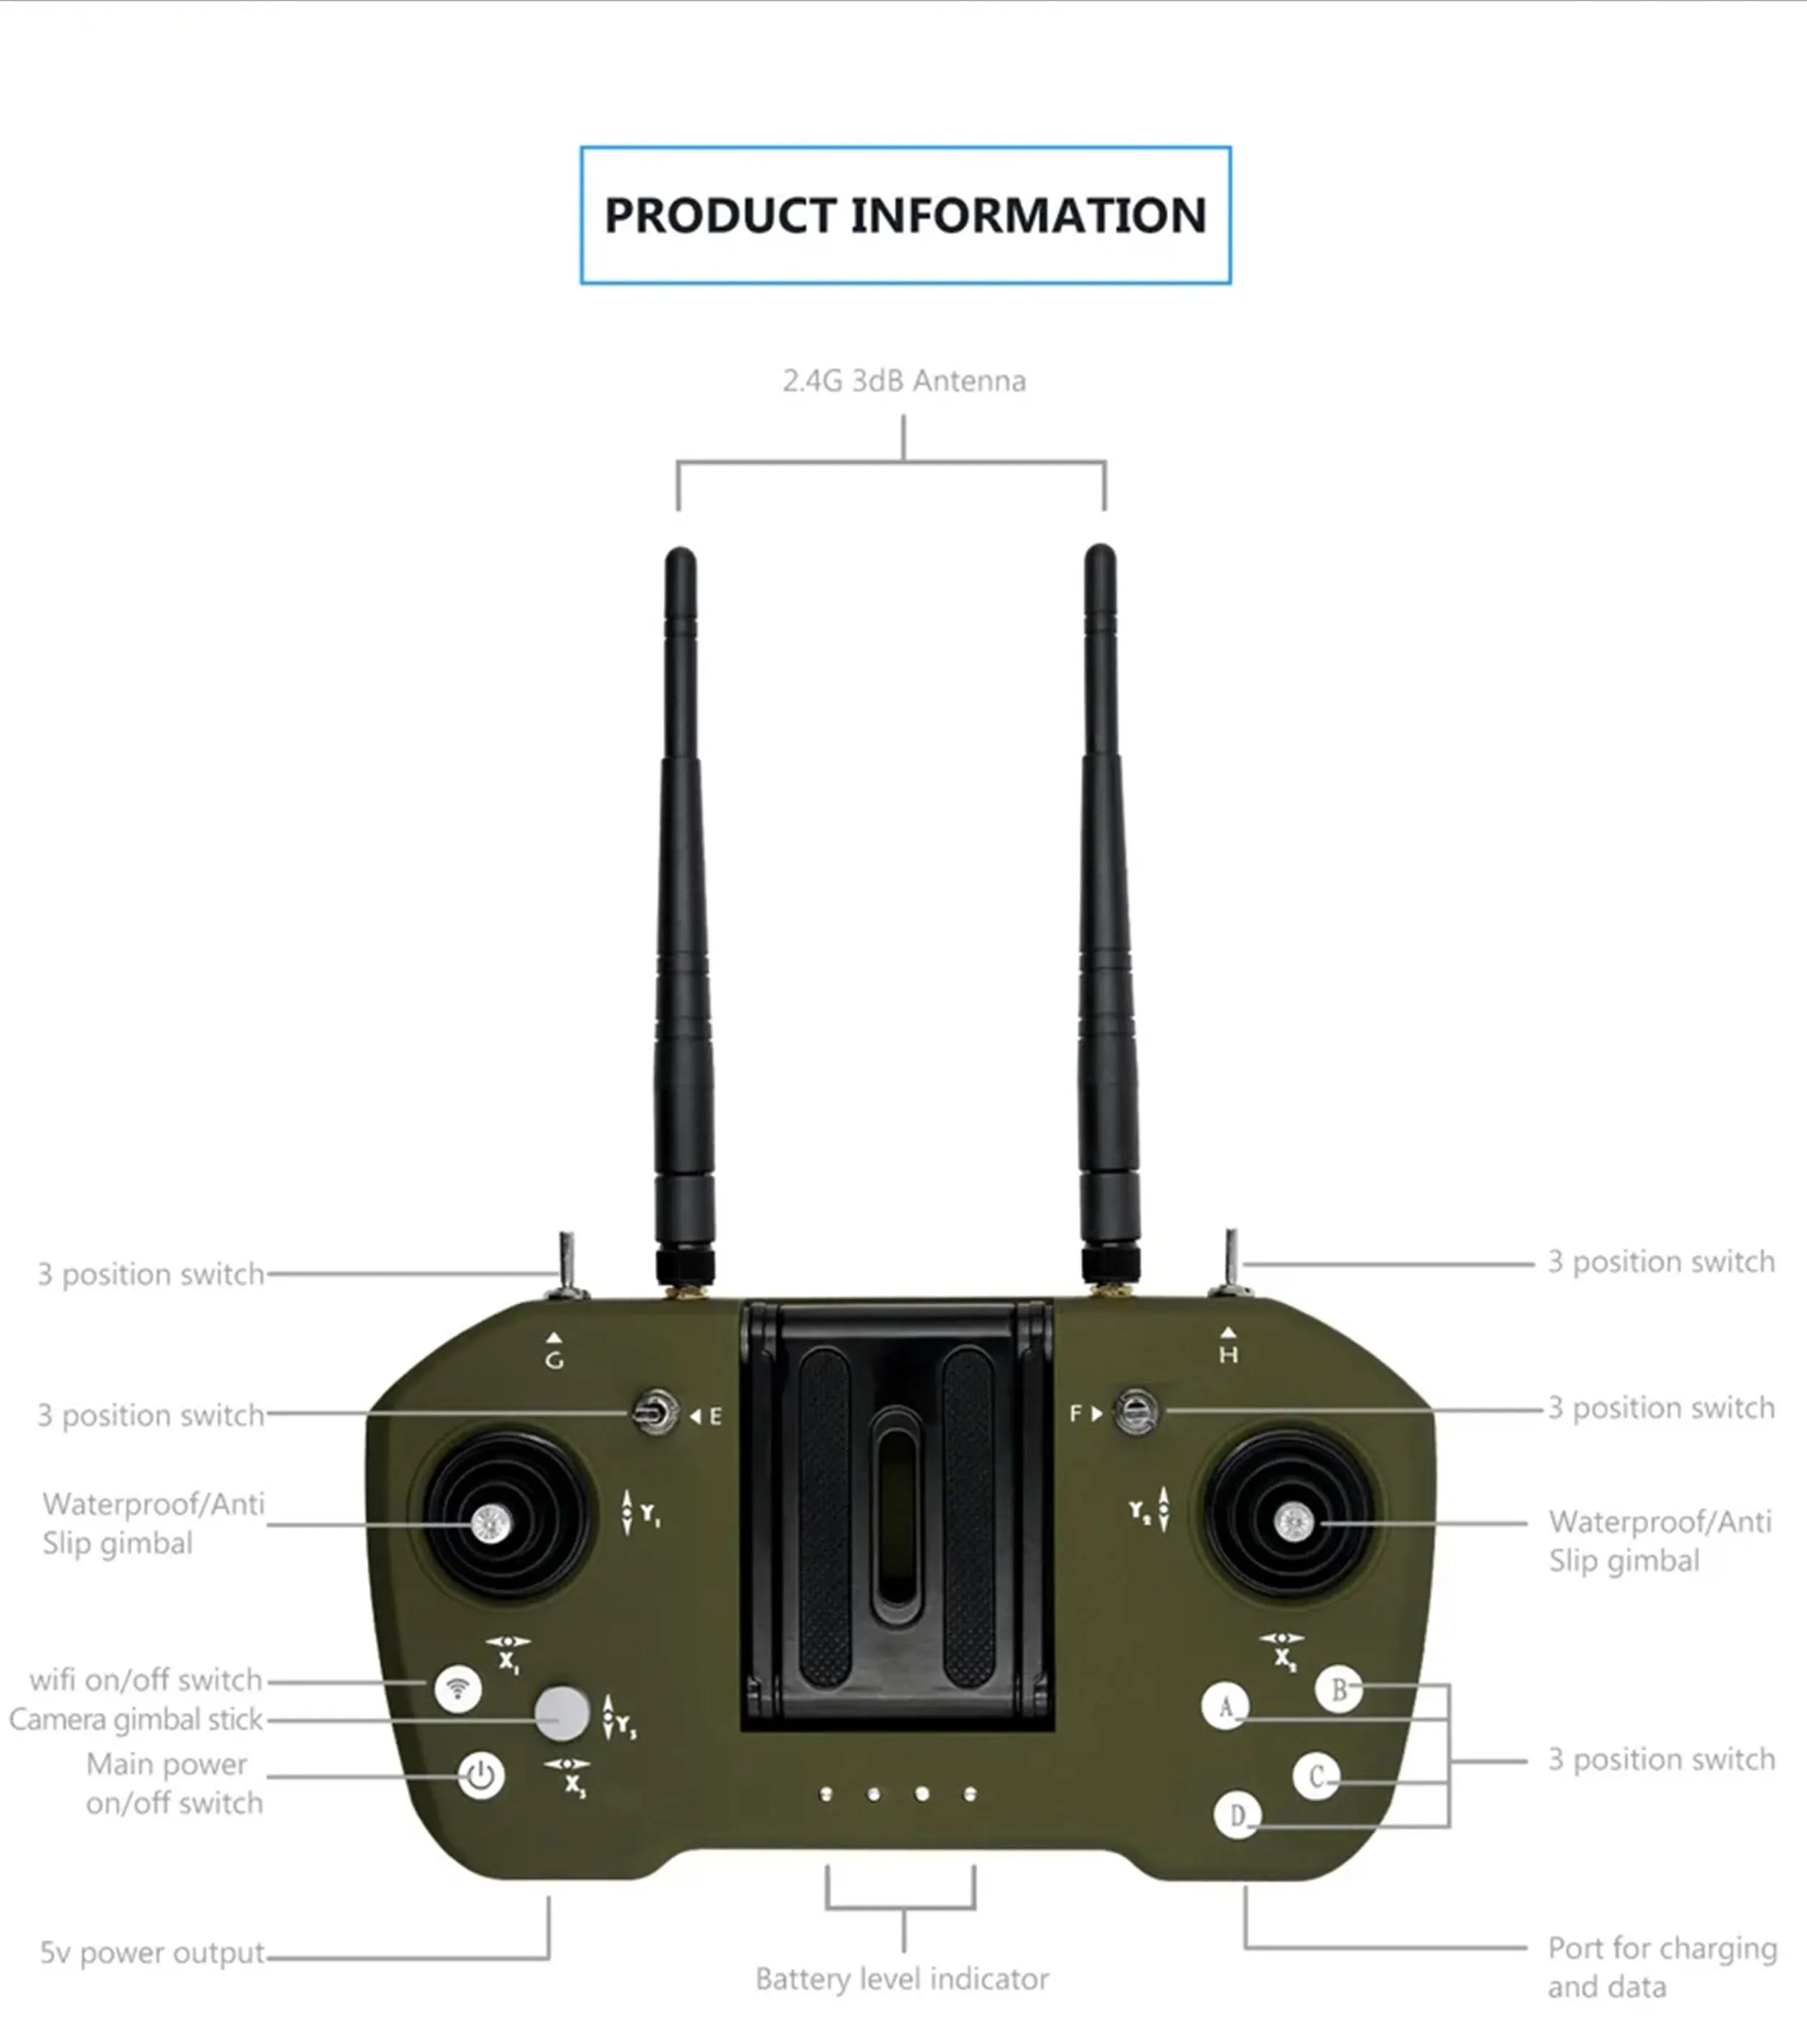 Skydroid M12L, Professional long-range drone radio system with advanced features like waterproofing and antenna.